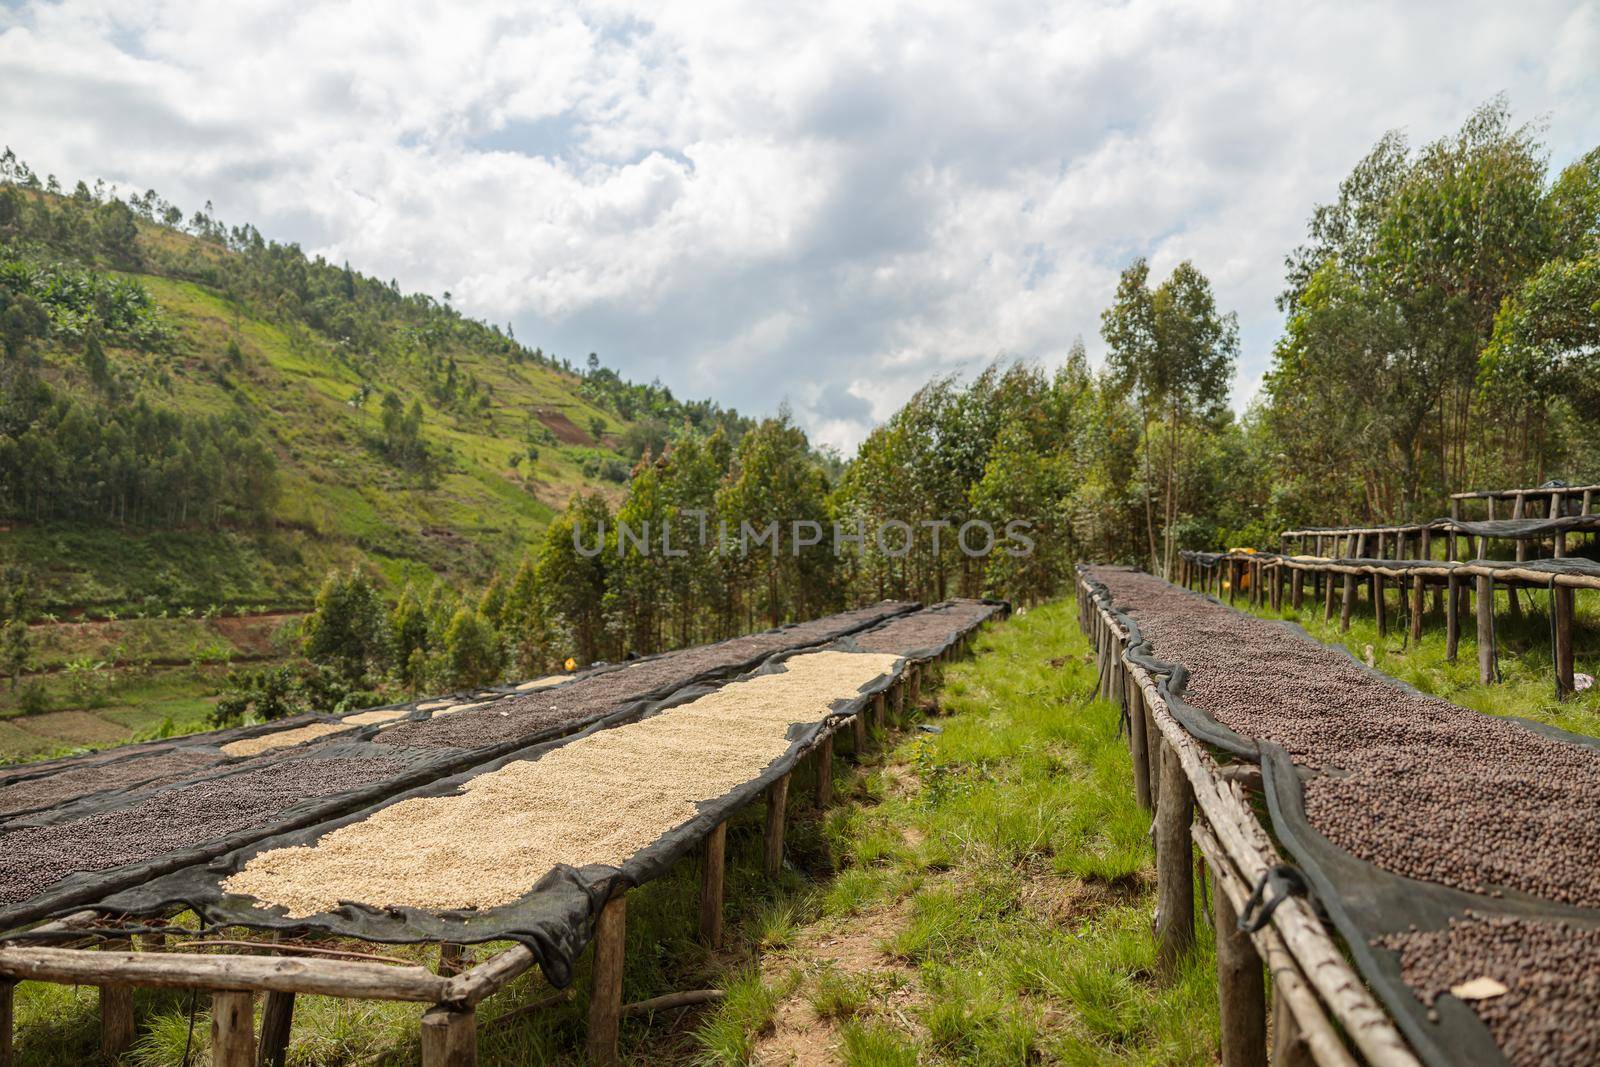 Long tables for drying coffee beans on a hill in Africa by Yaroslav_astakhov